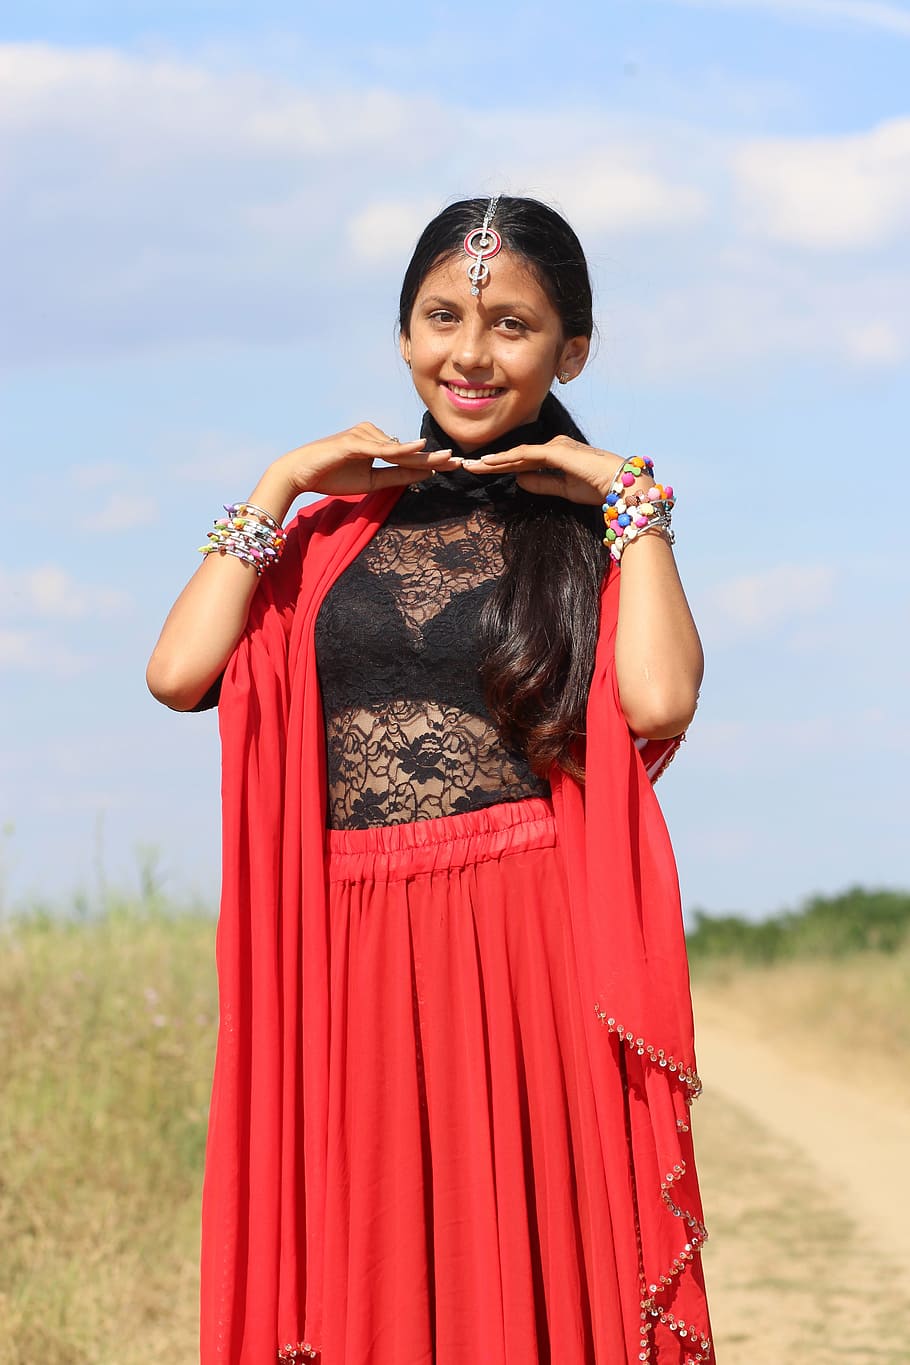 Girl, Indian, Red, Oriental, Beauty, indian, red, oriental, beauty, smiling, only women, dress